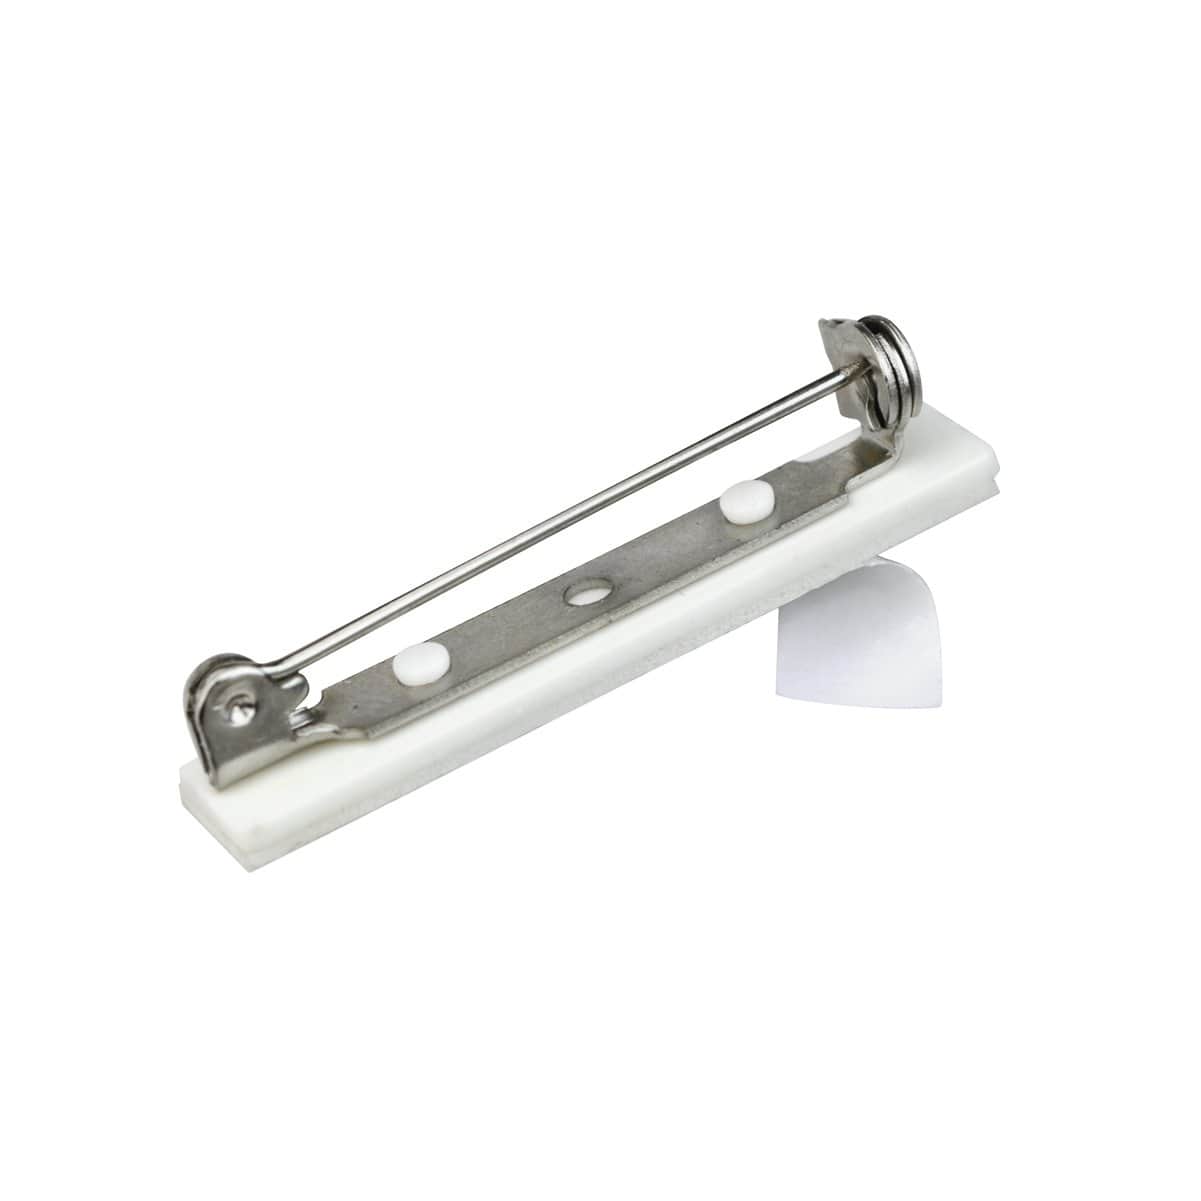 A Pressure-Sensitive 1 1/2 inch Nickel-Plated Steel Bar Pin with Adhesive Pin Back (P/N 5735-1100), typically used for fastening ID badges or name tags.